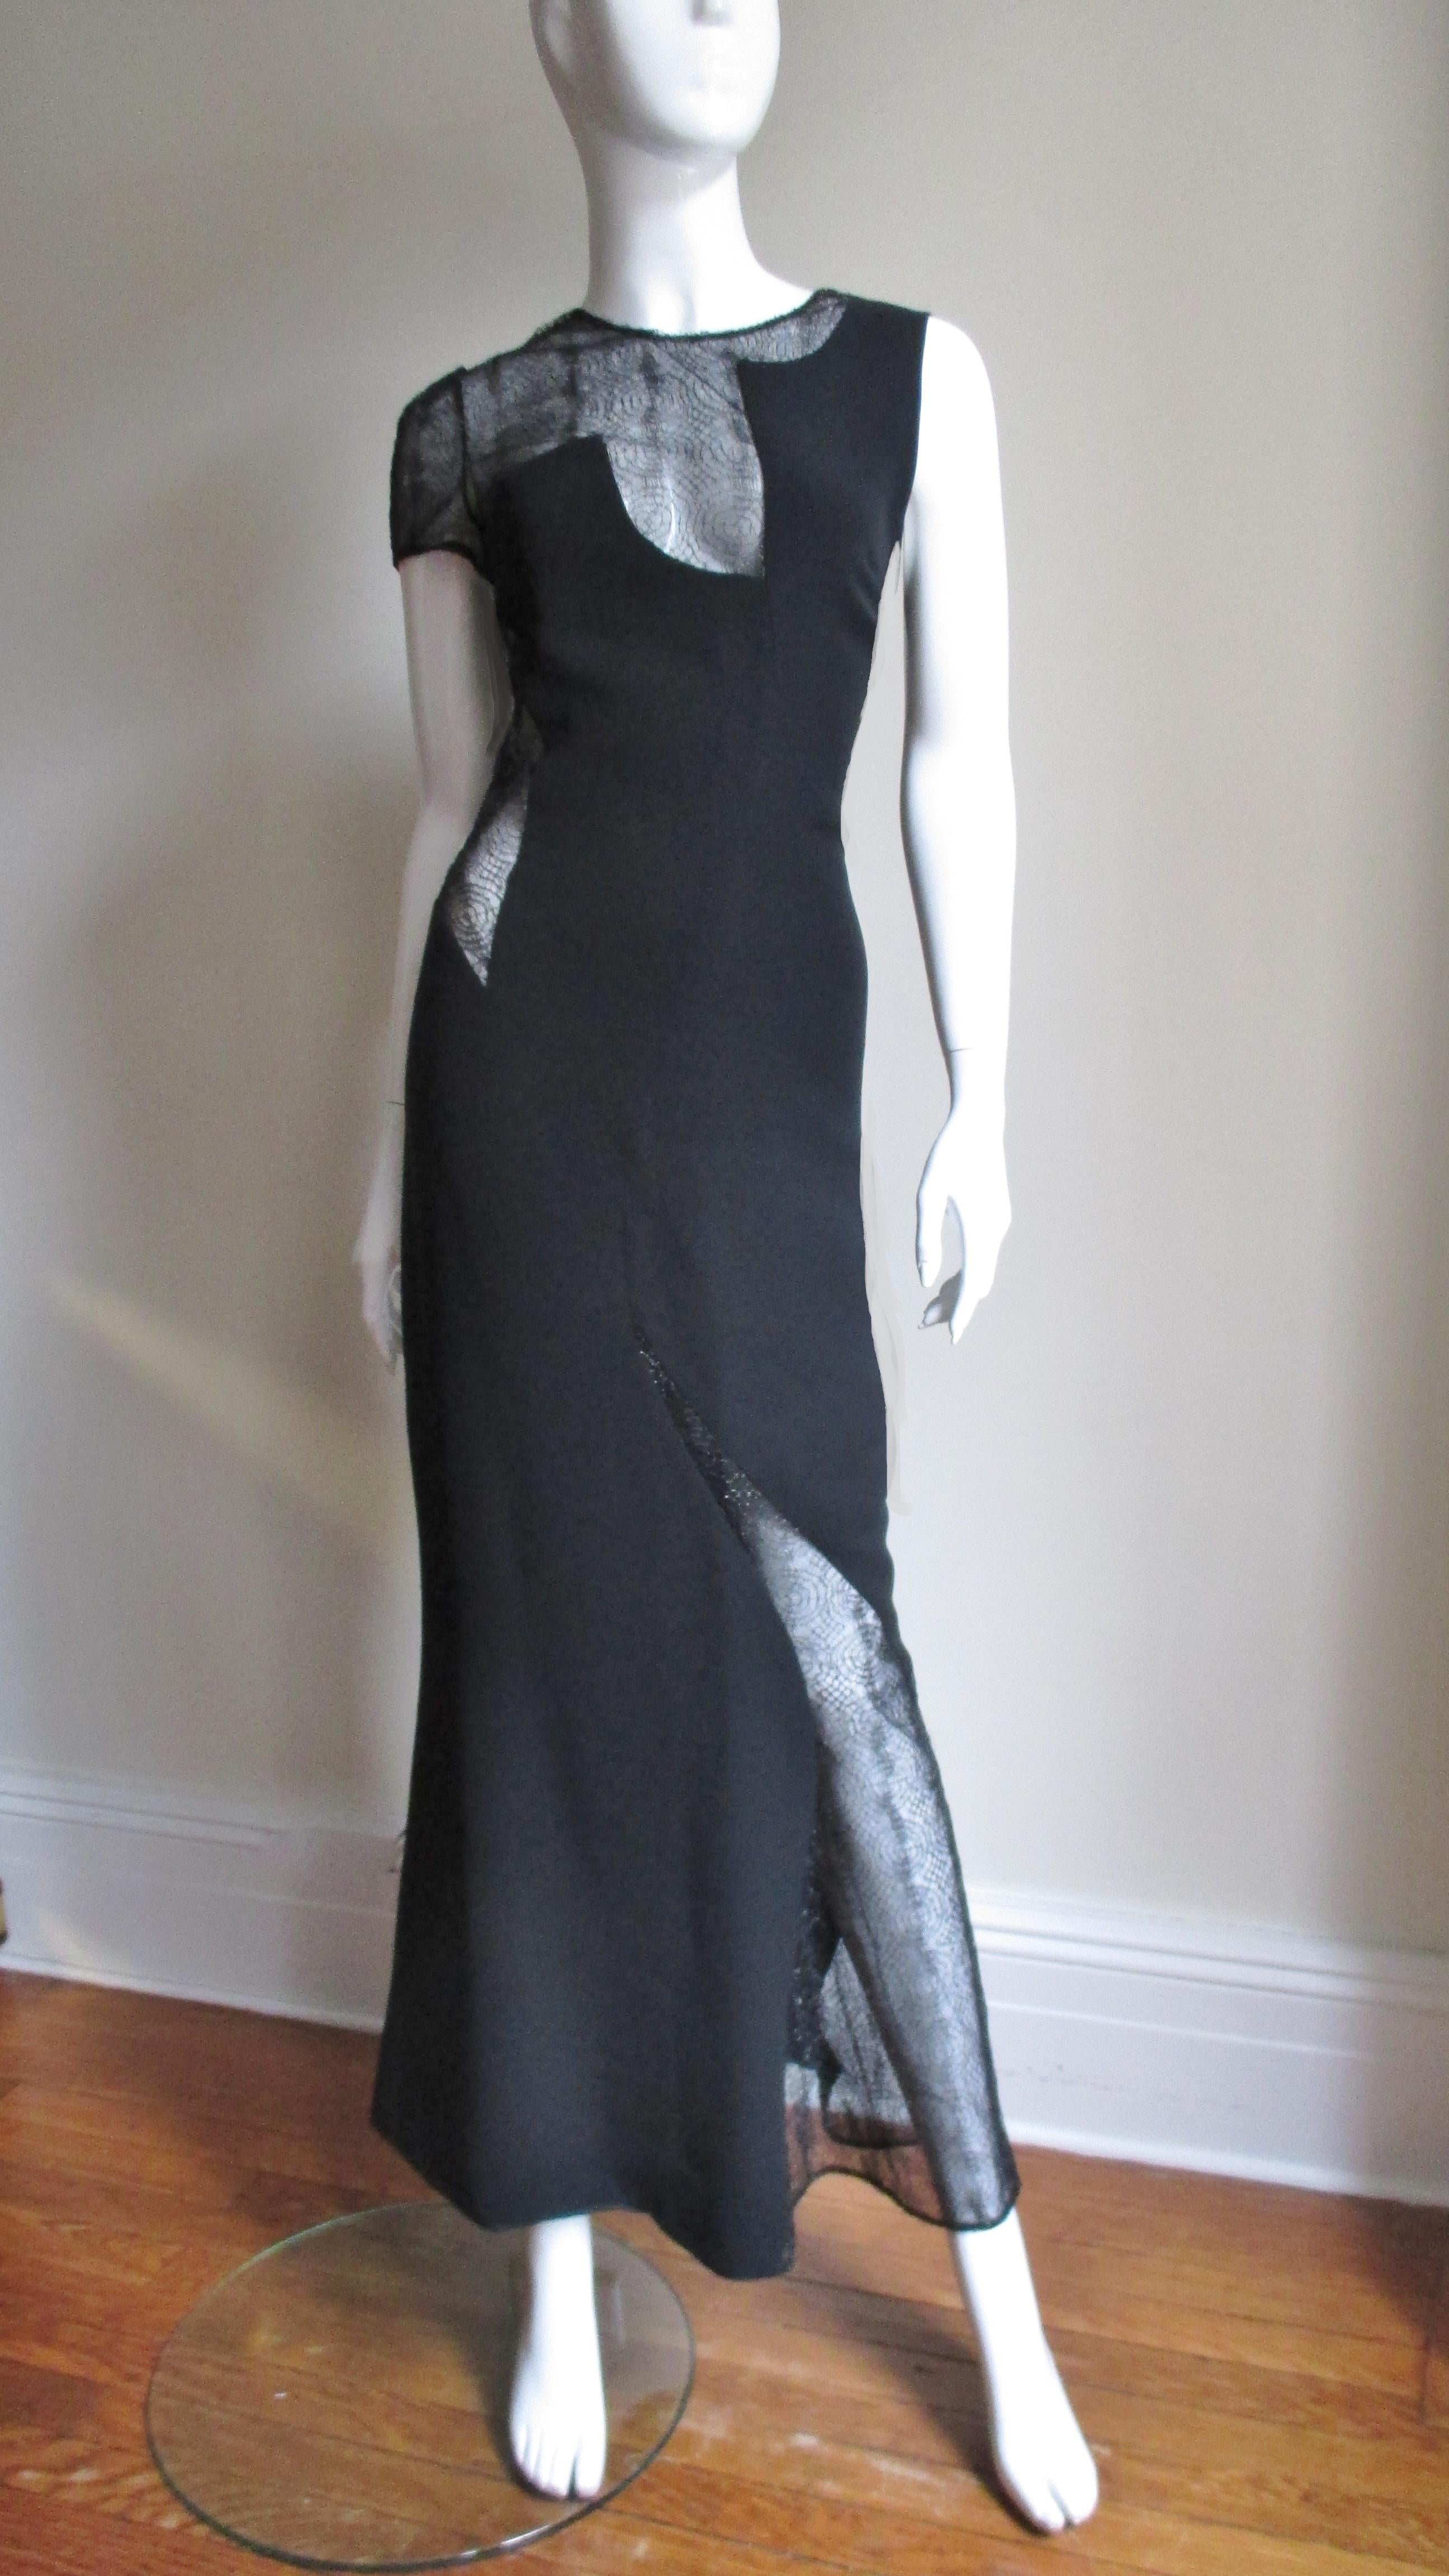 Black 1990s Gianni Versace Asymmetric Gown with Lace Cutouts